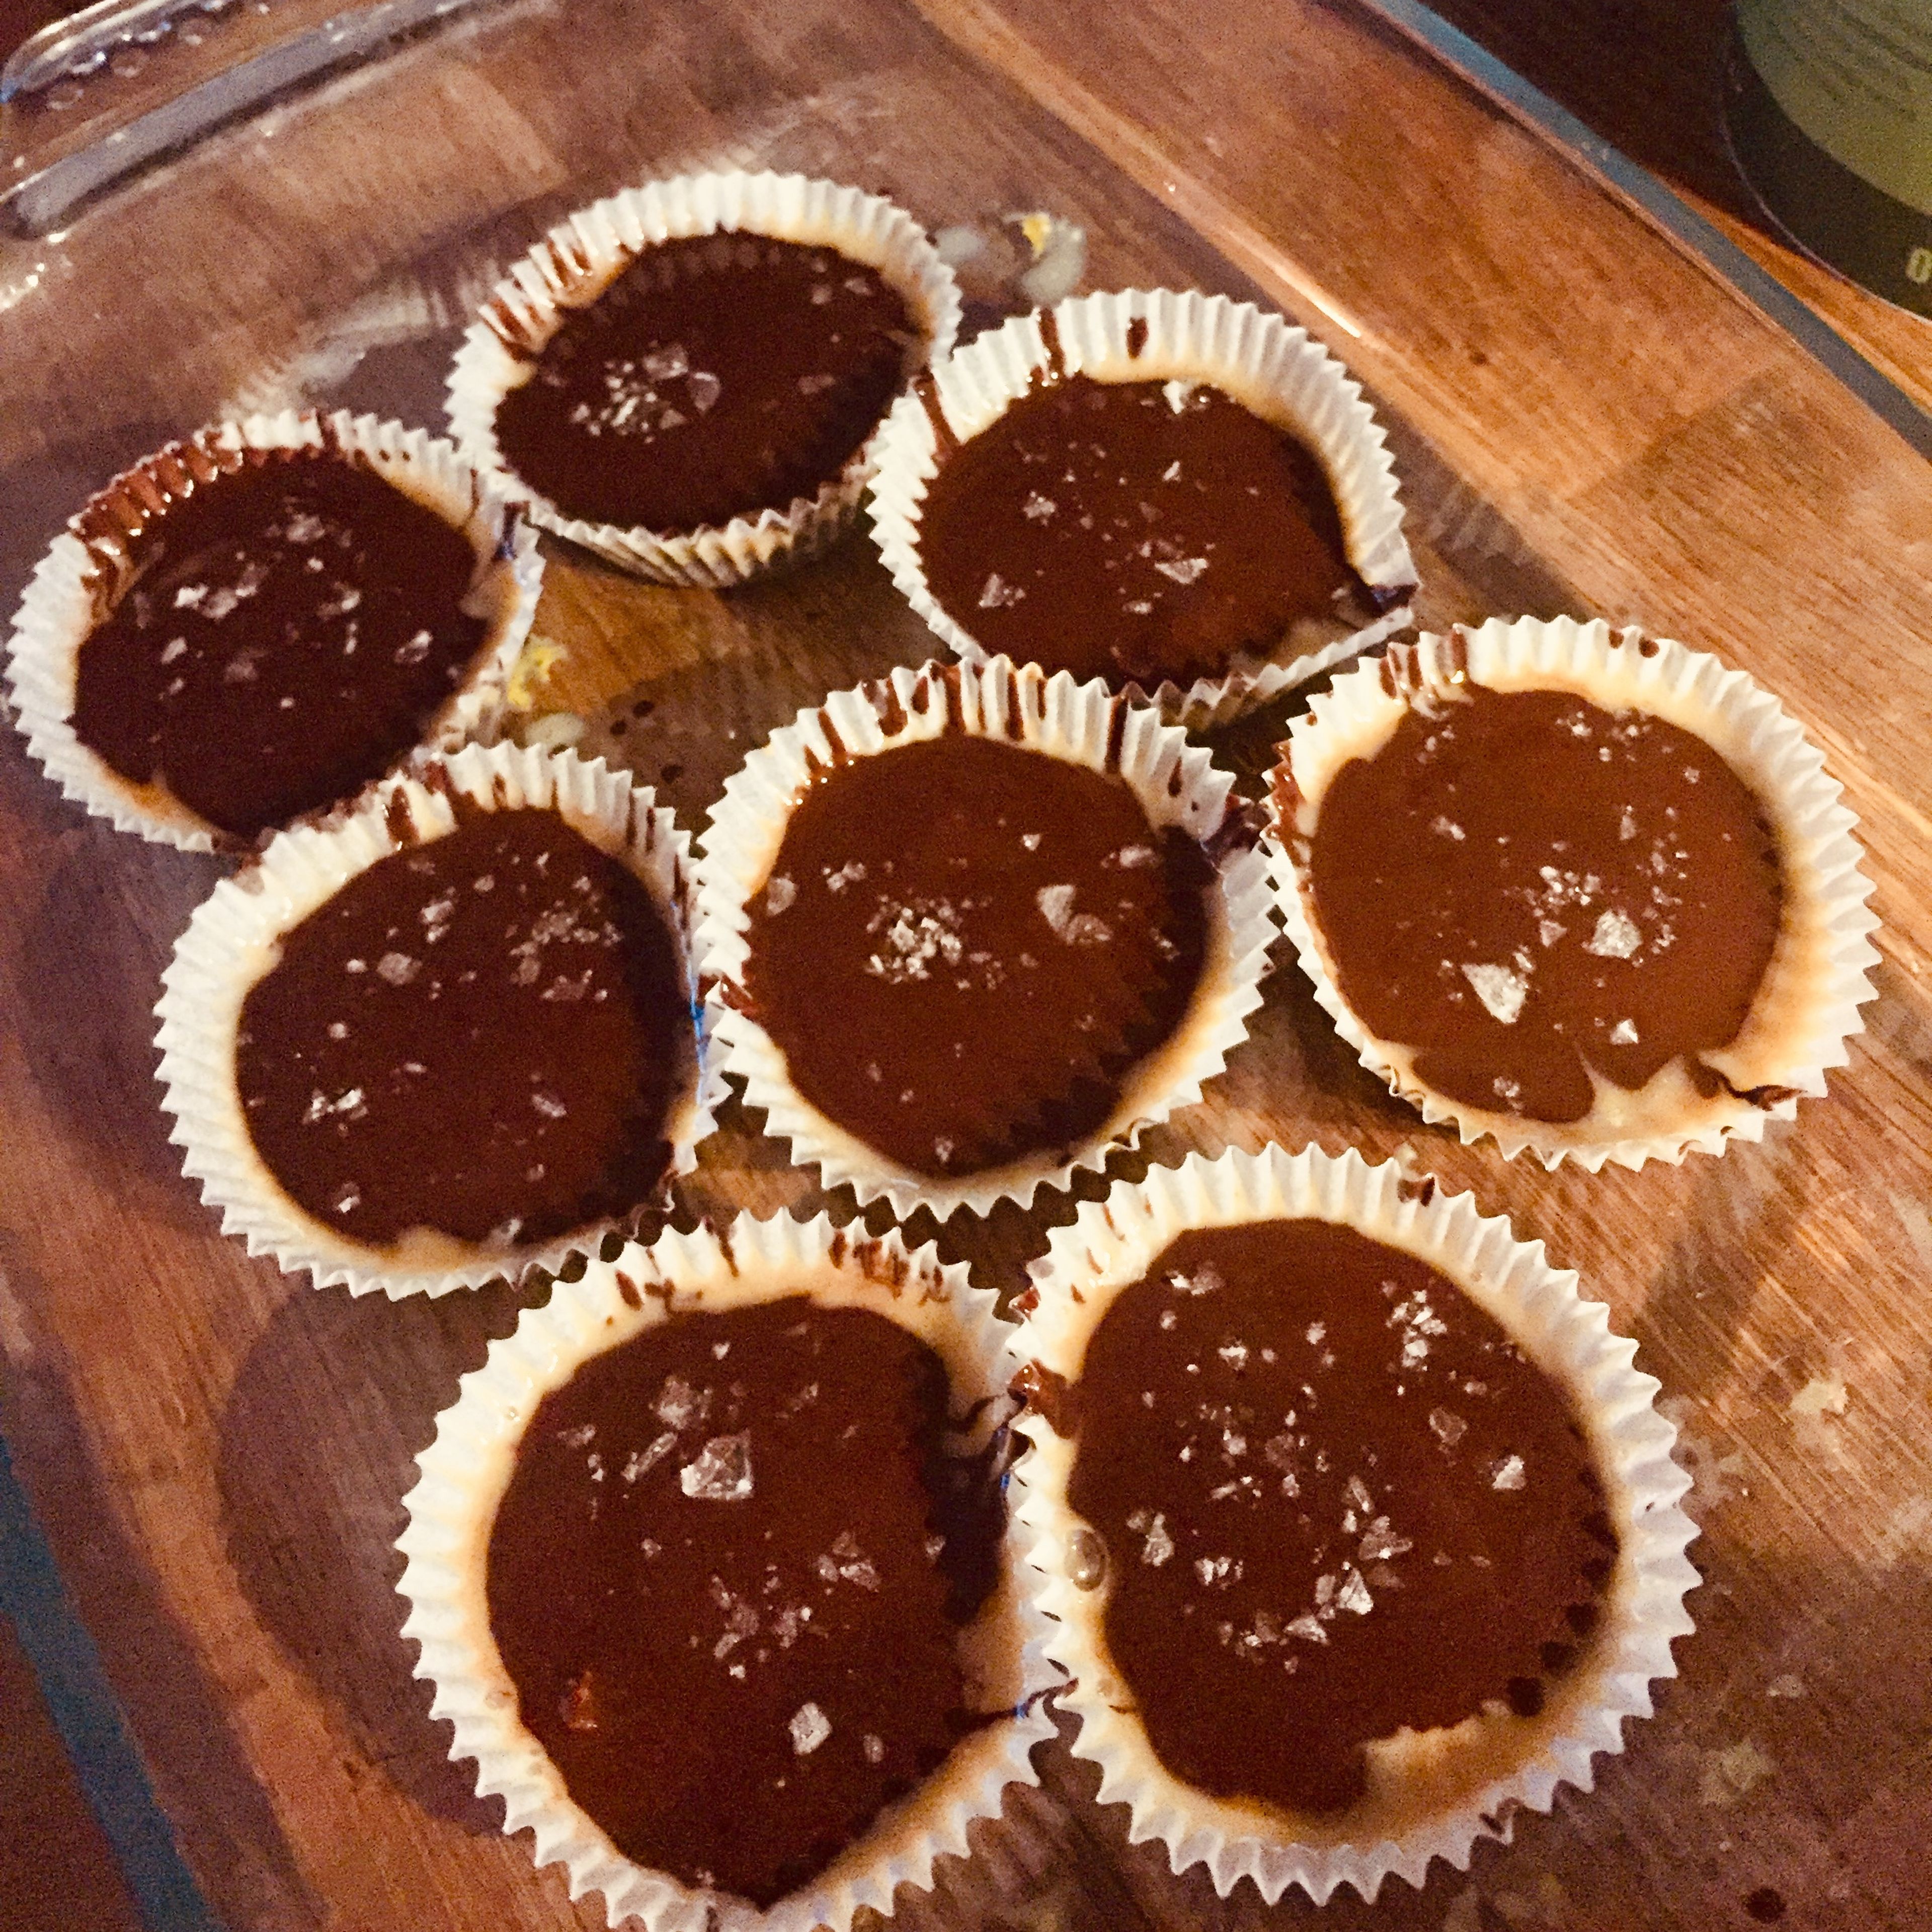 Sprinkle a pinch of sea salt on top of each peanut butter cup before putting them back into the freezer for around an hour. Enjoy!